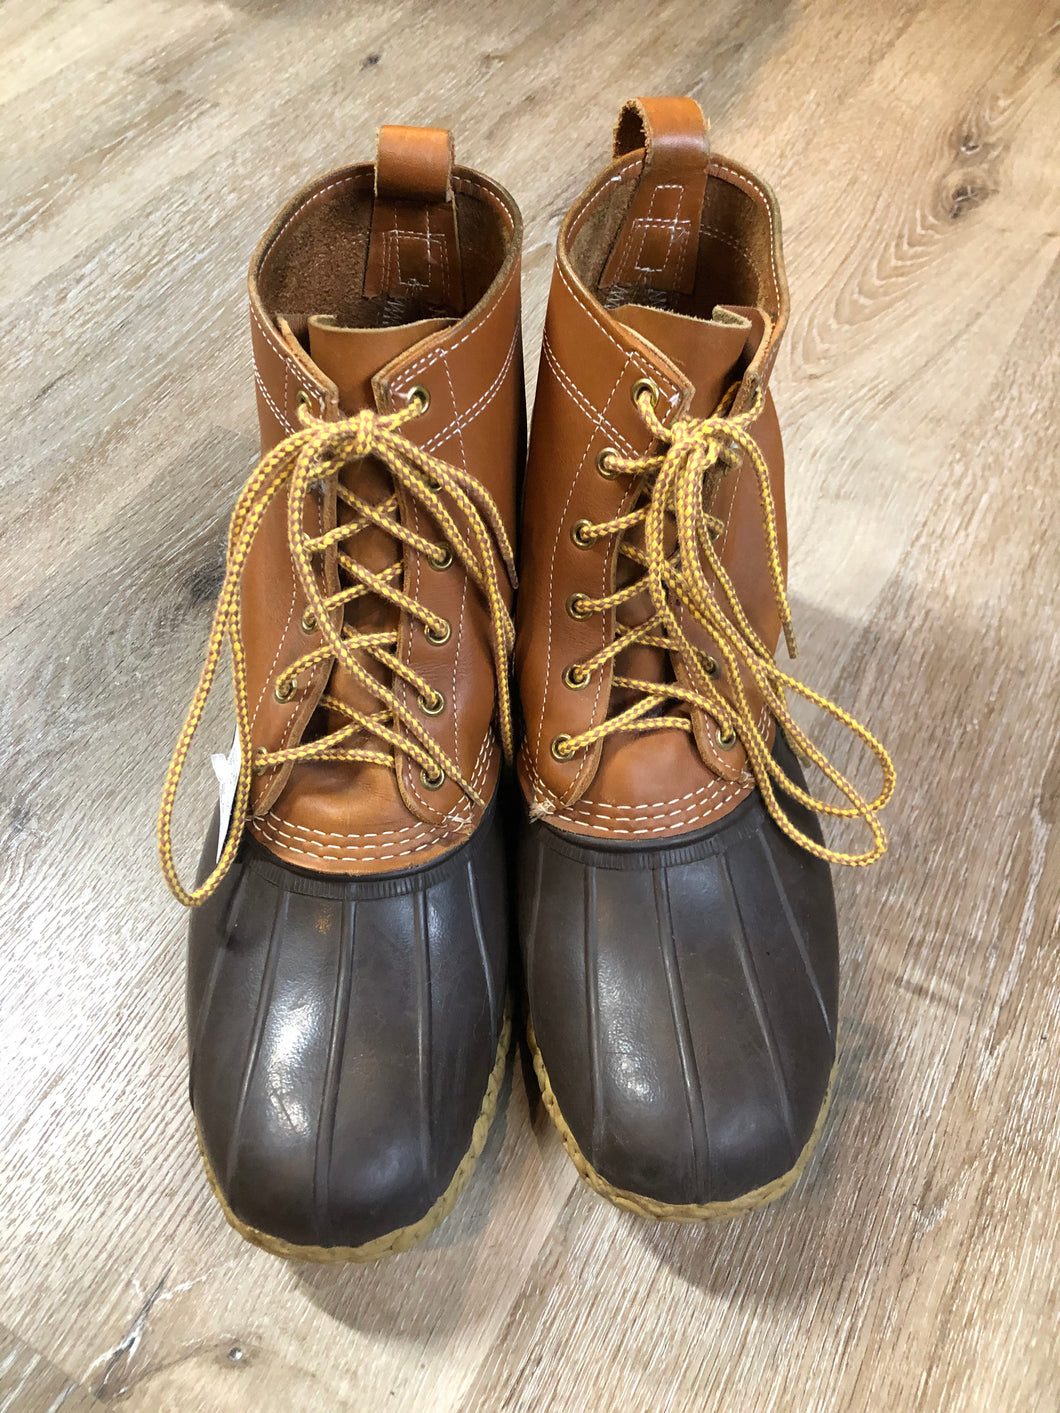 Vintage LL Bean “Bean Boots” or “Duck Boots” 6 eyelet lace up rain boot with full grain leather upper and a waterproof rubber covering the foot and a rubber chain-tread outsole. Made in Maine, USA.

Size 12 Mens

The uppers and soles are in excellent condition.